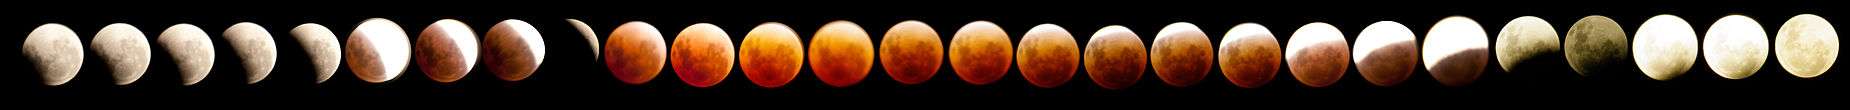 a series of 27 images of the moon during the eclipse